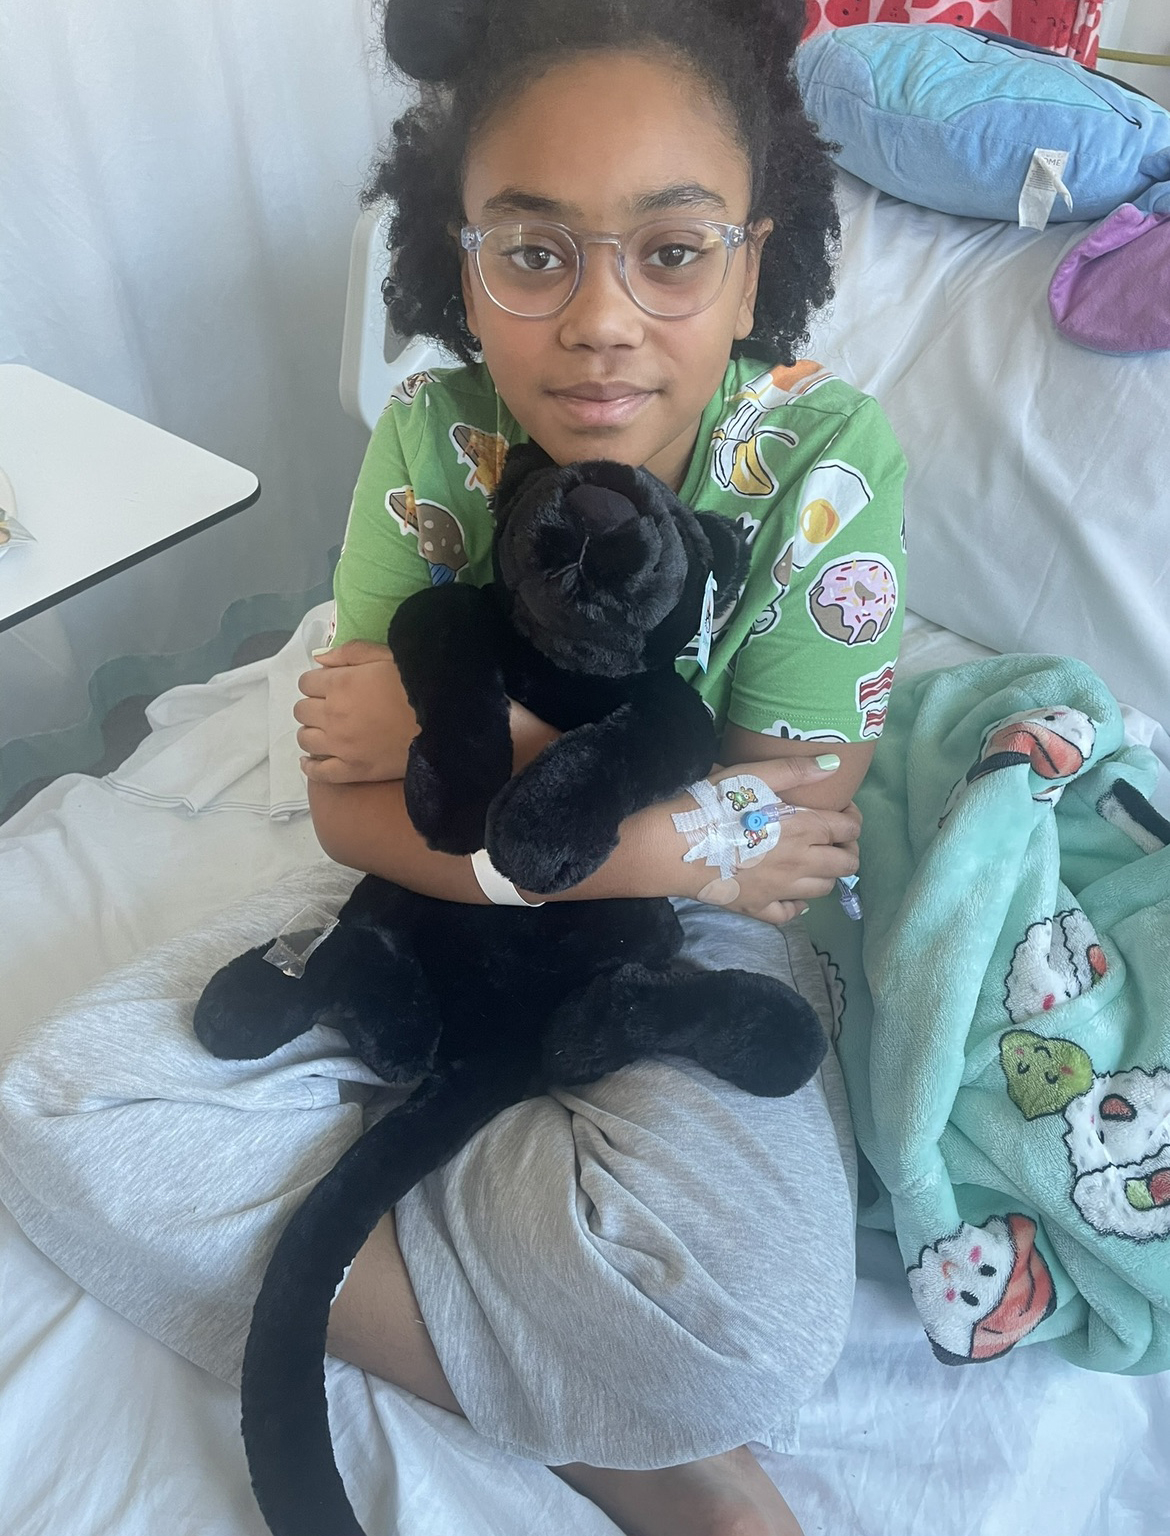 Tia is an animal lover, and was comforted by her cuddly toys during her treatment